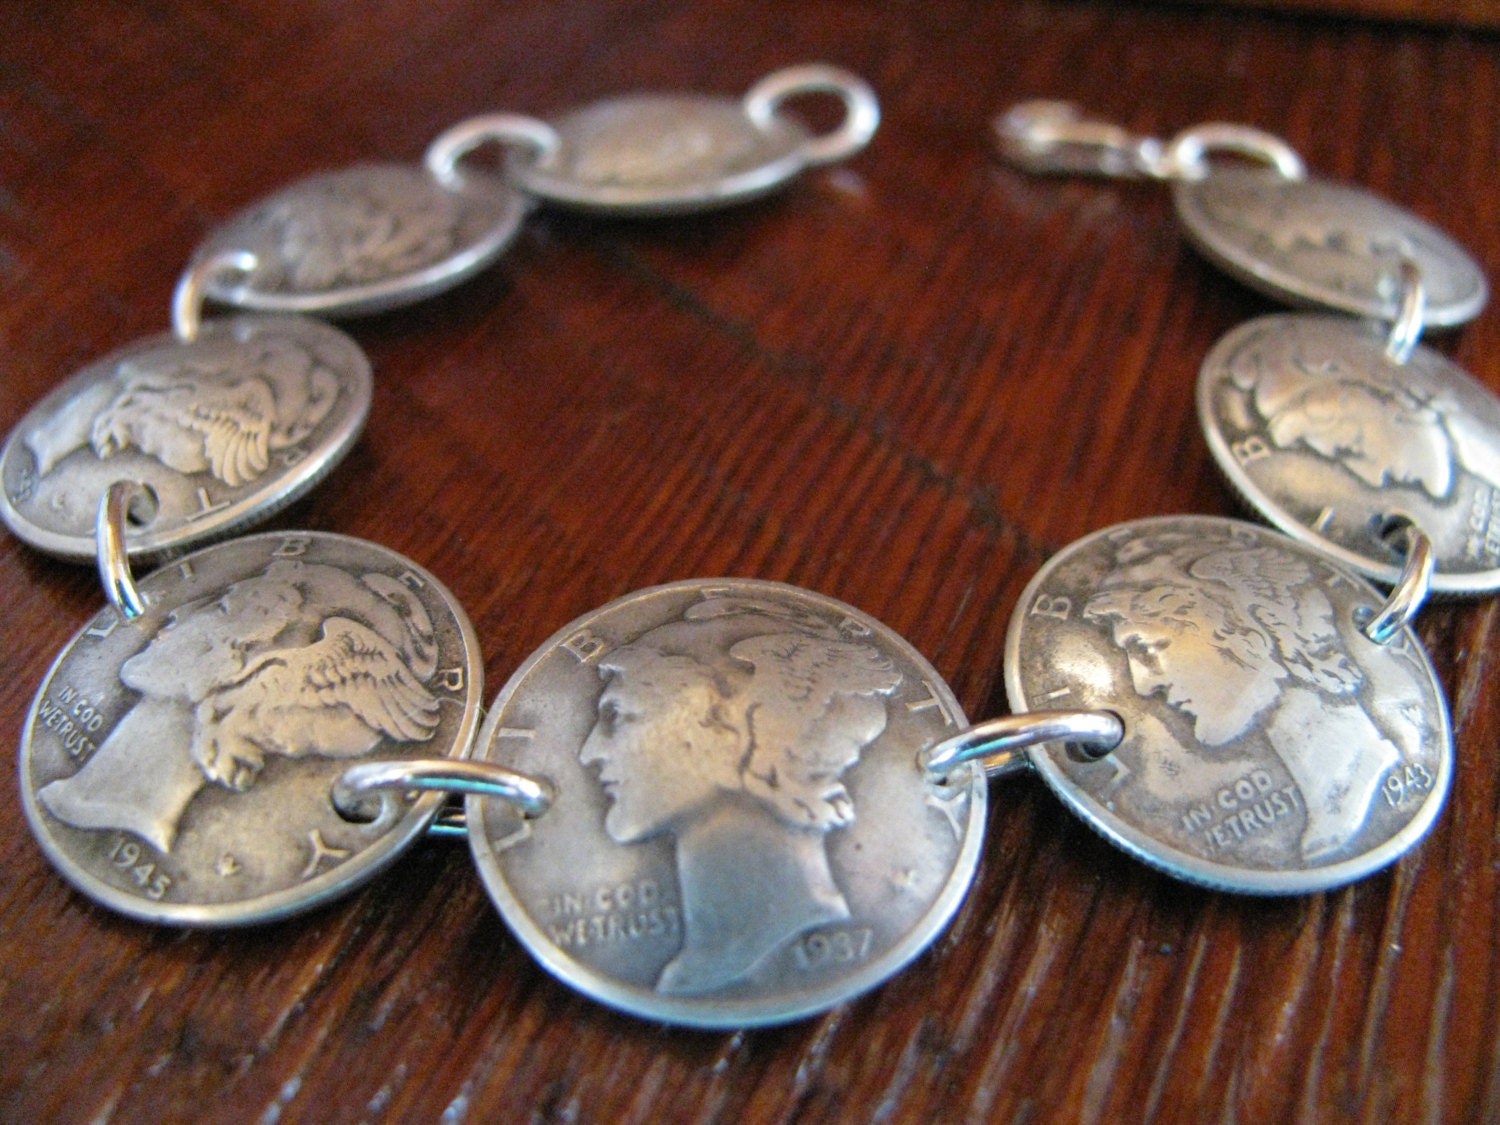 90% Silver Mercury Dime Bracelet Coin Jewelry Solid Silver